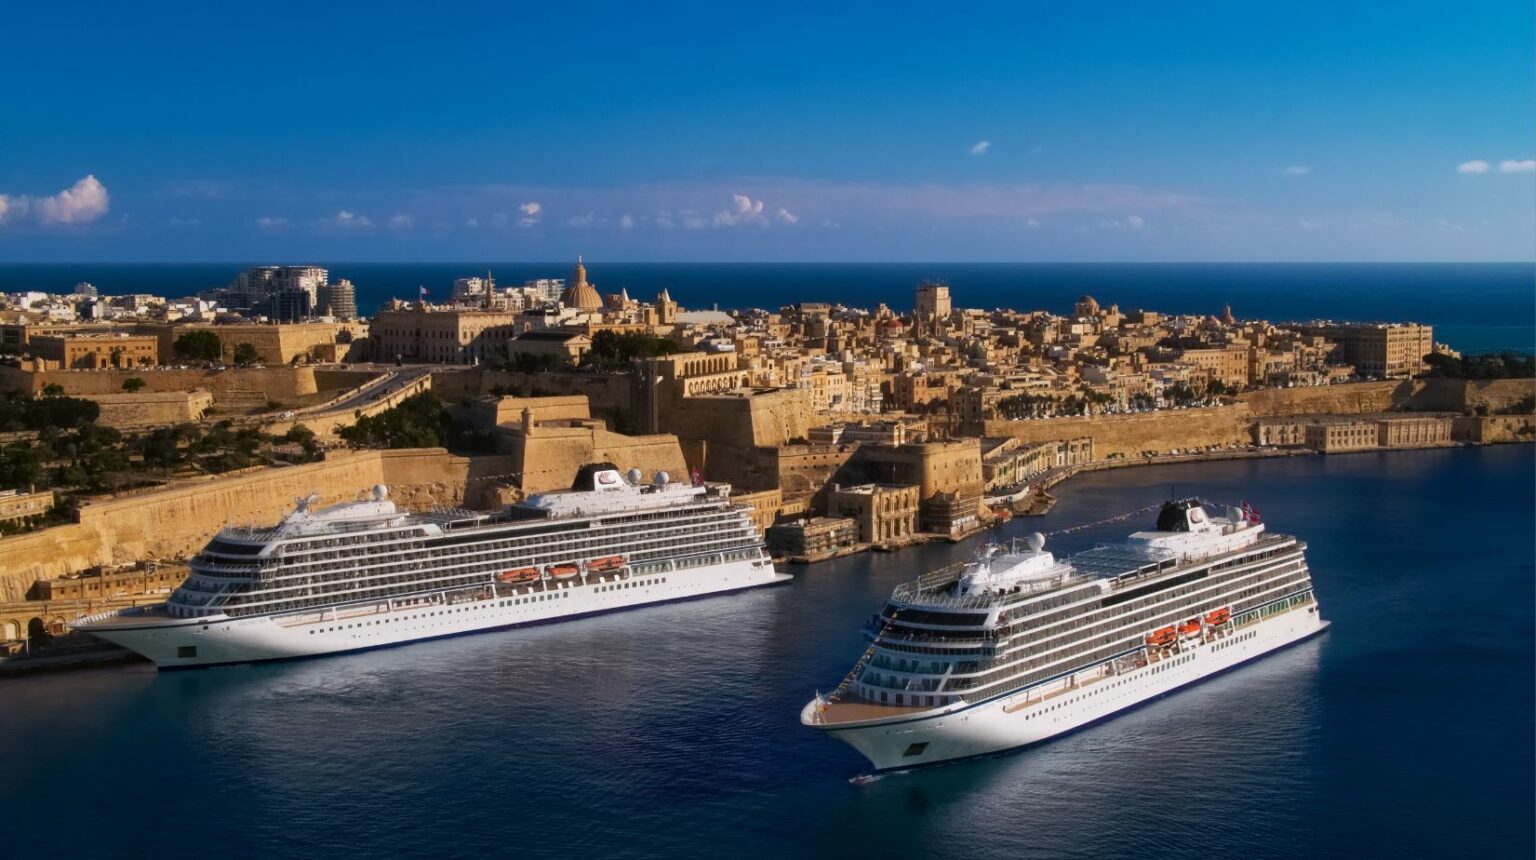 Viking announces new Mediterranean voyages for summer 2021 CRUISE TO